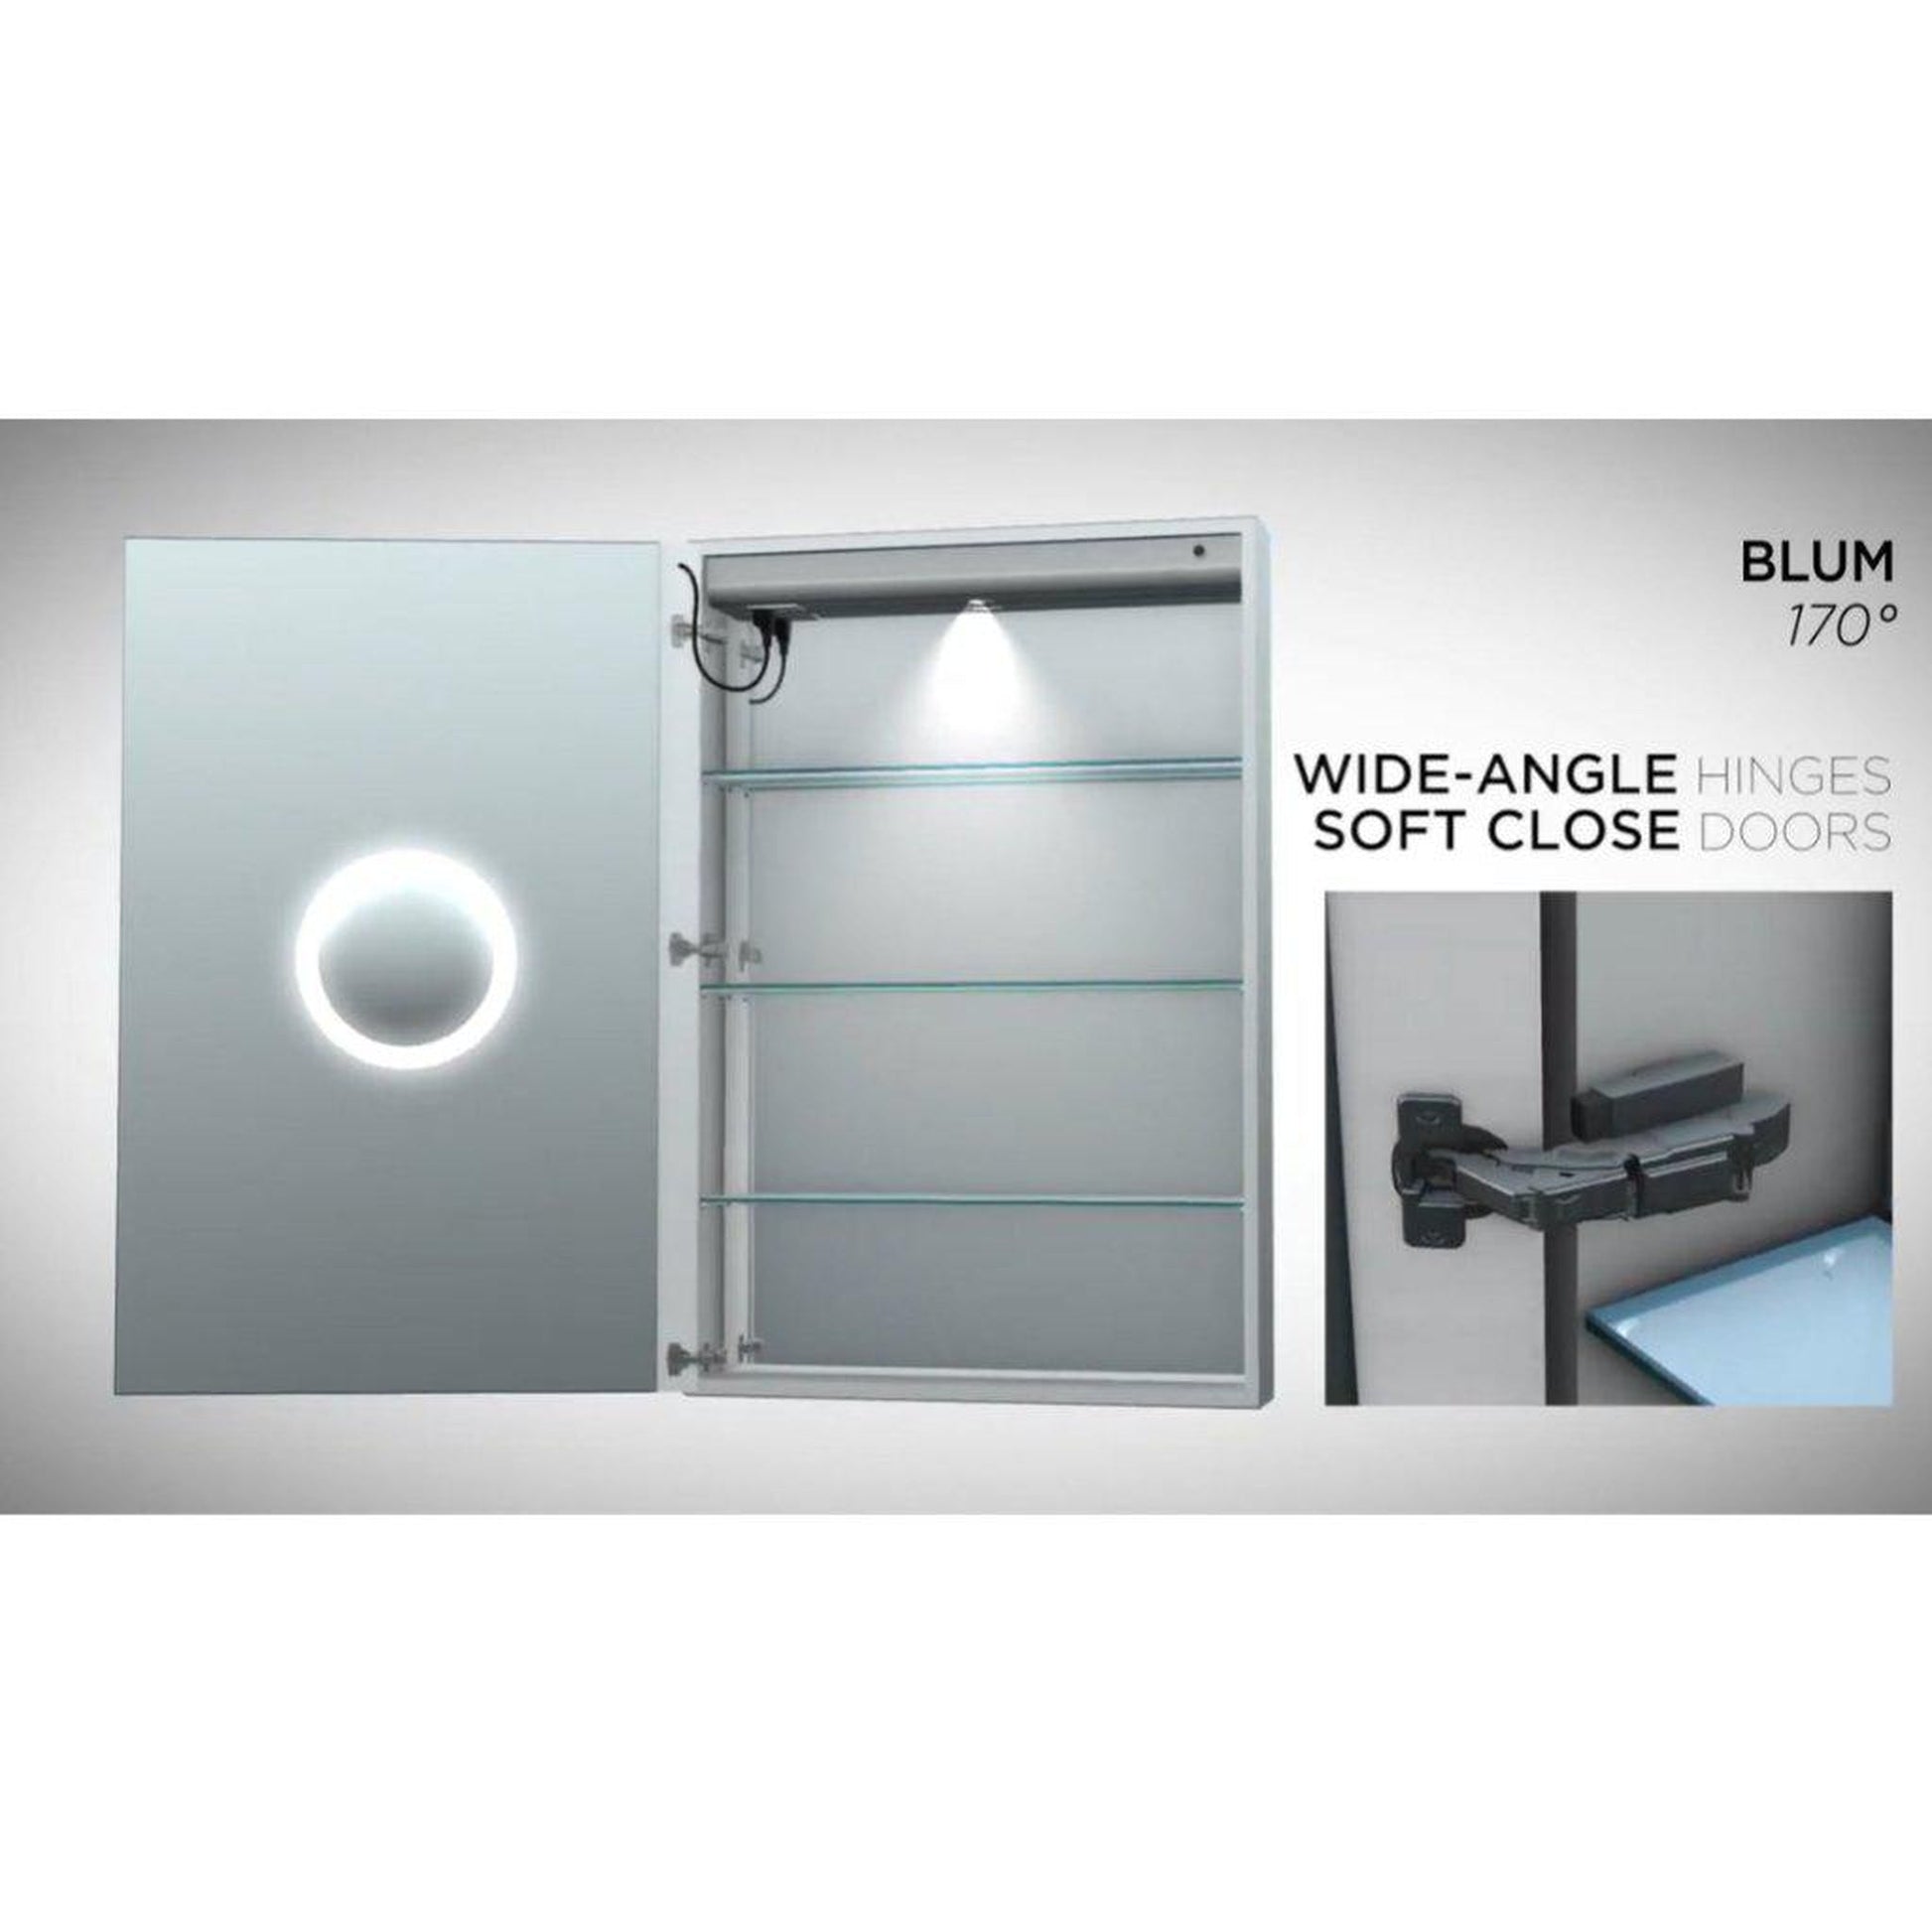 Krugg Reflections Svange 102" x 42" 5000K Double Penta-View Left-Left-Right-Right-Right Opening Recessed/Surface-Mount Illuminated Silver Backed LED Medicine Cabinet Mirror With Built-in Defogger, Dimmer and Electrical Outlet